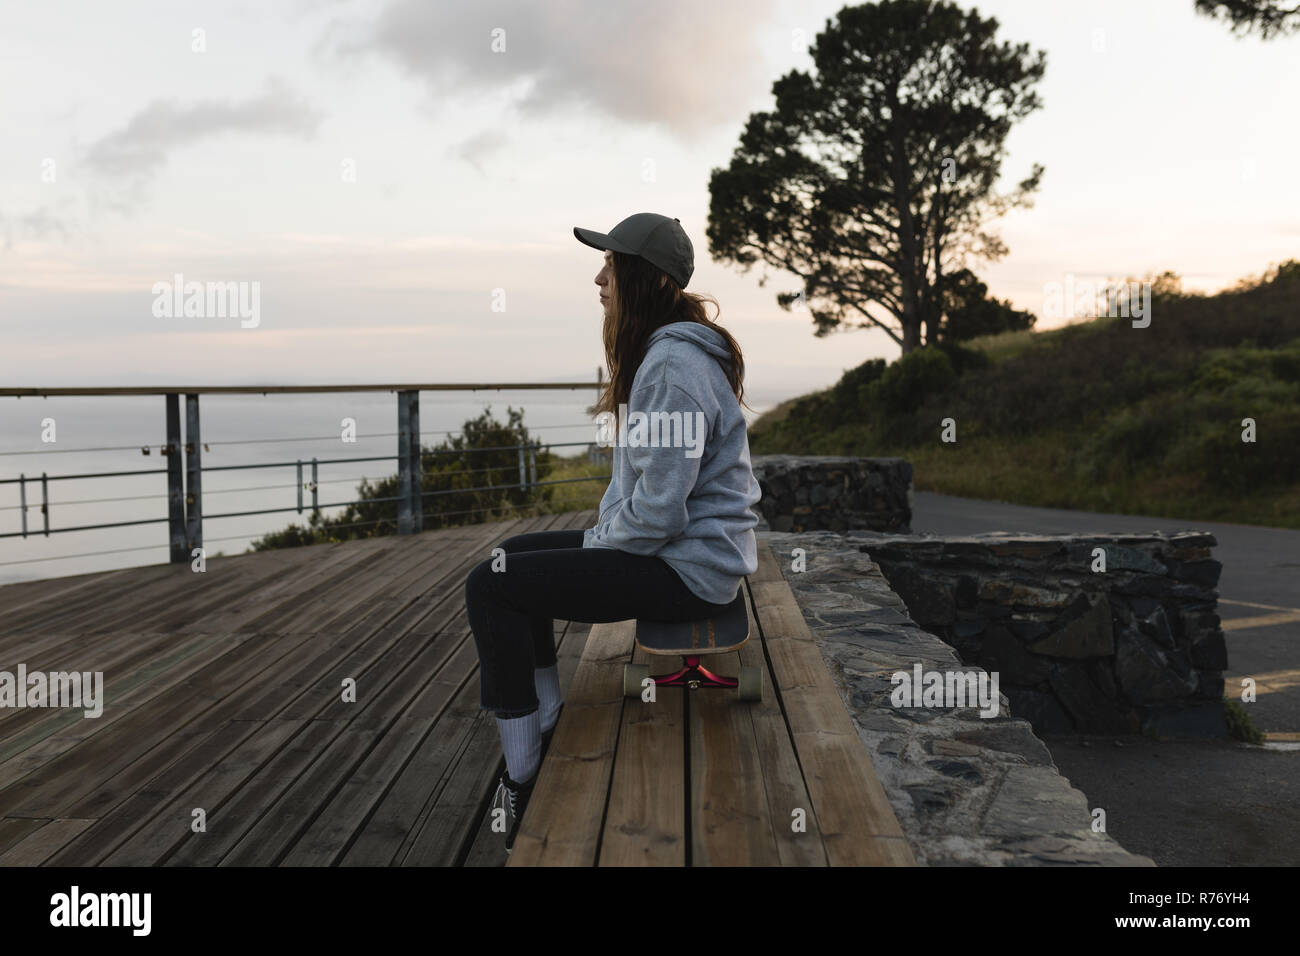 Female skateboarder sitting on skateboard by railing at observation point Stock Photo